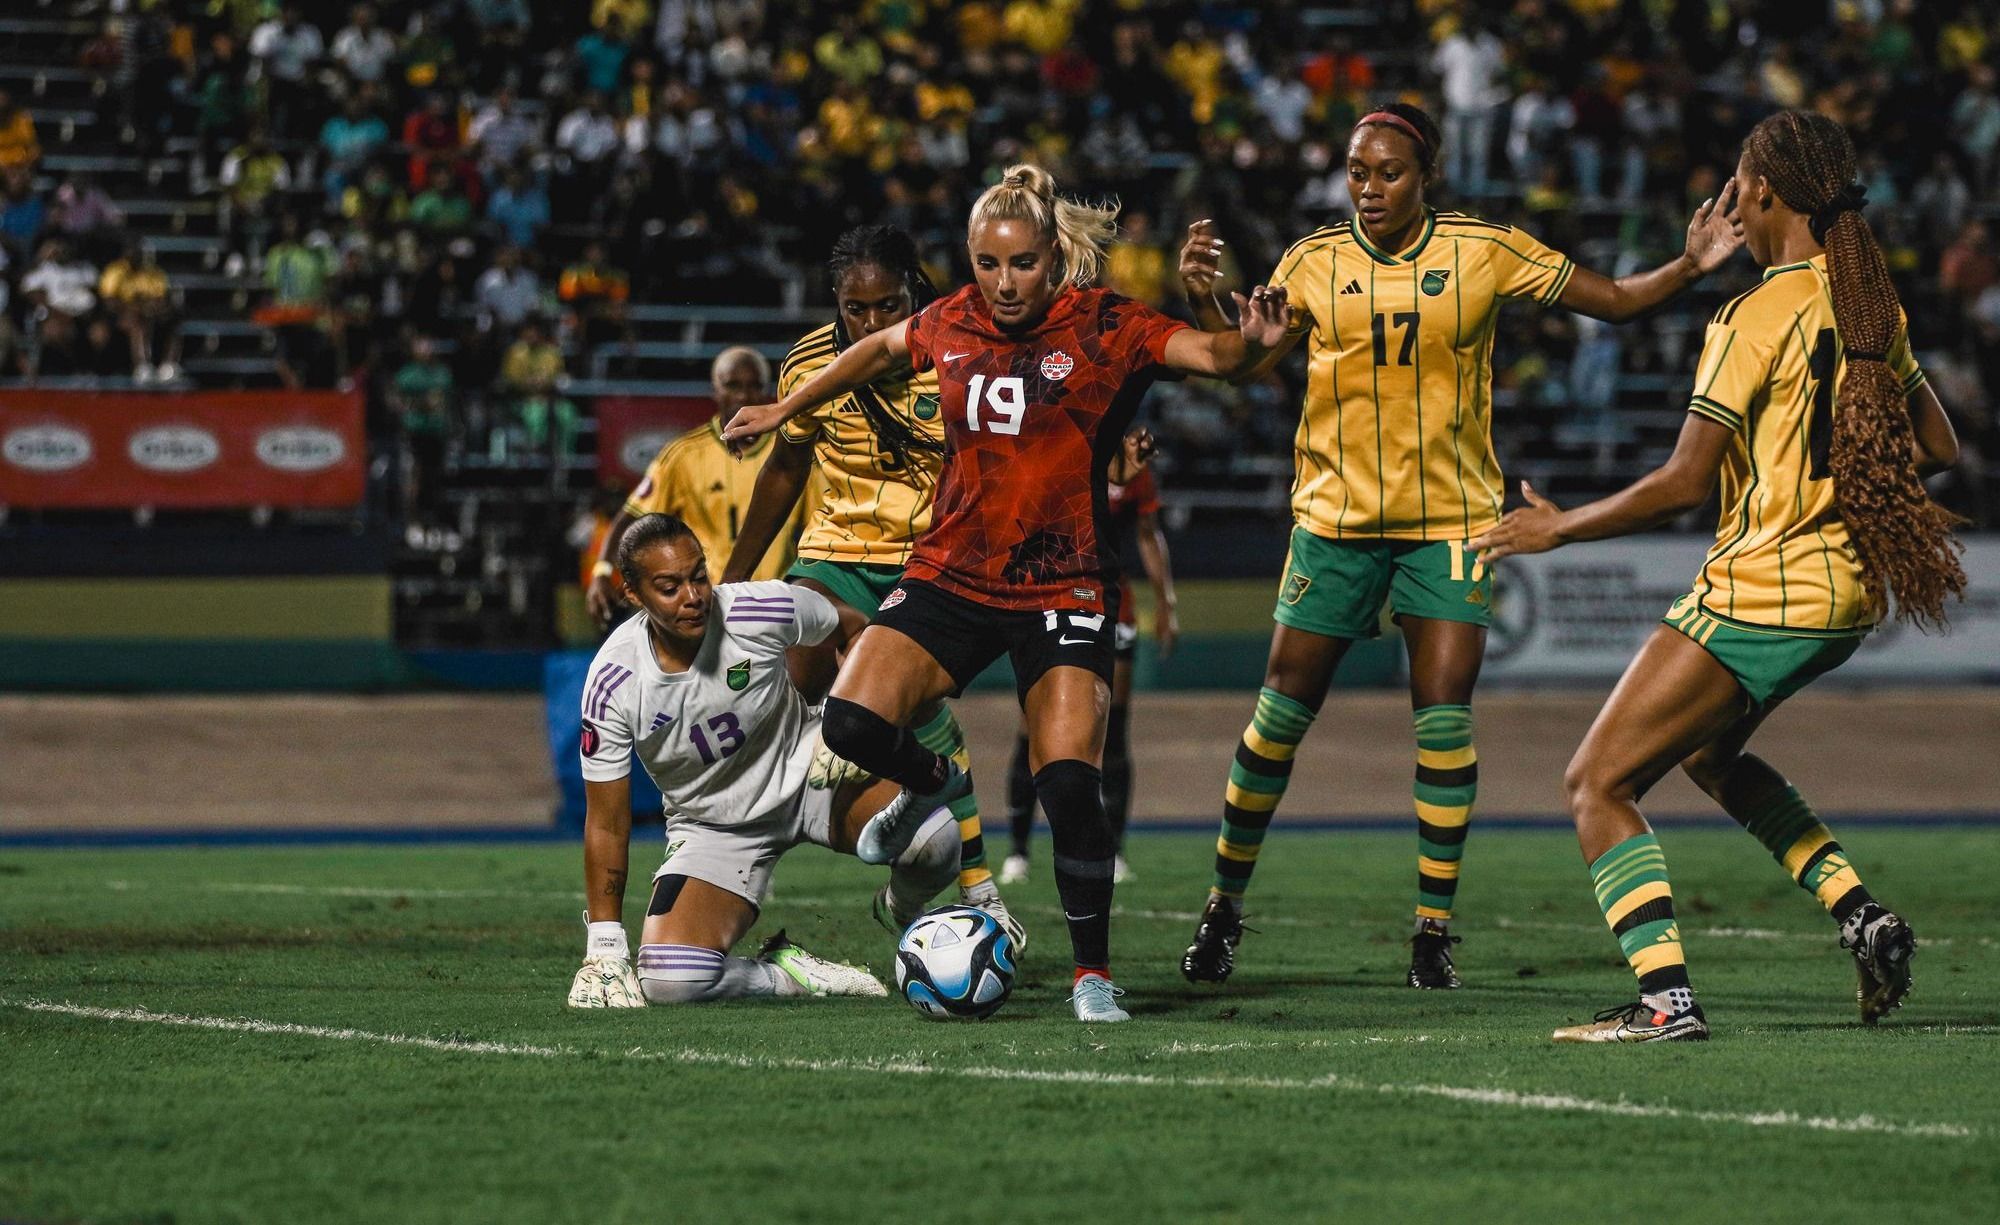 CanWNT Talk: Olympic champs get back to basics in win over Jamaica